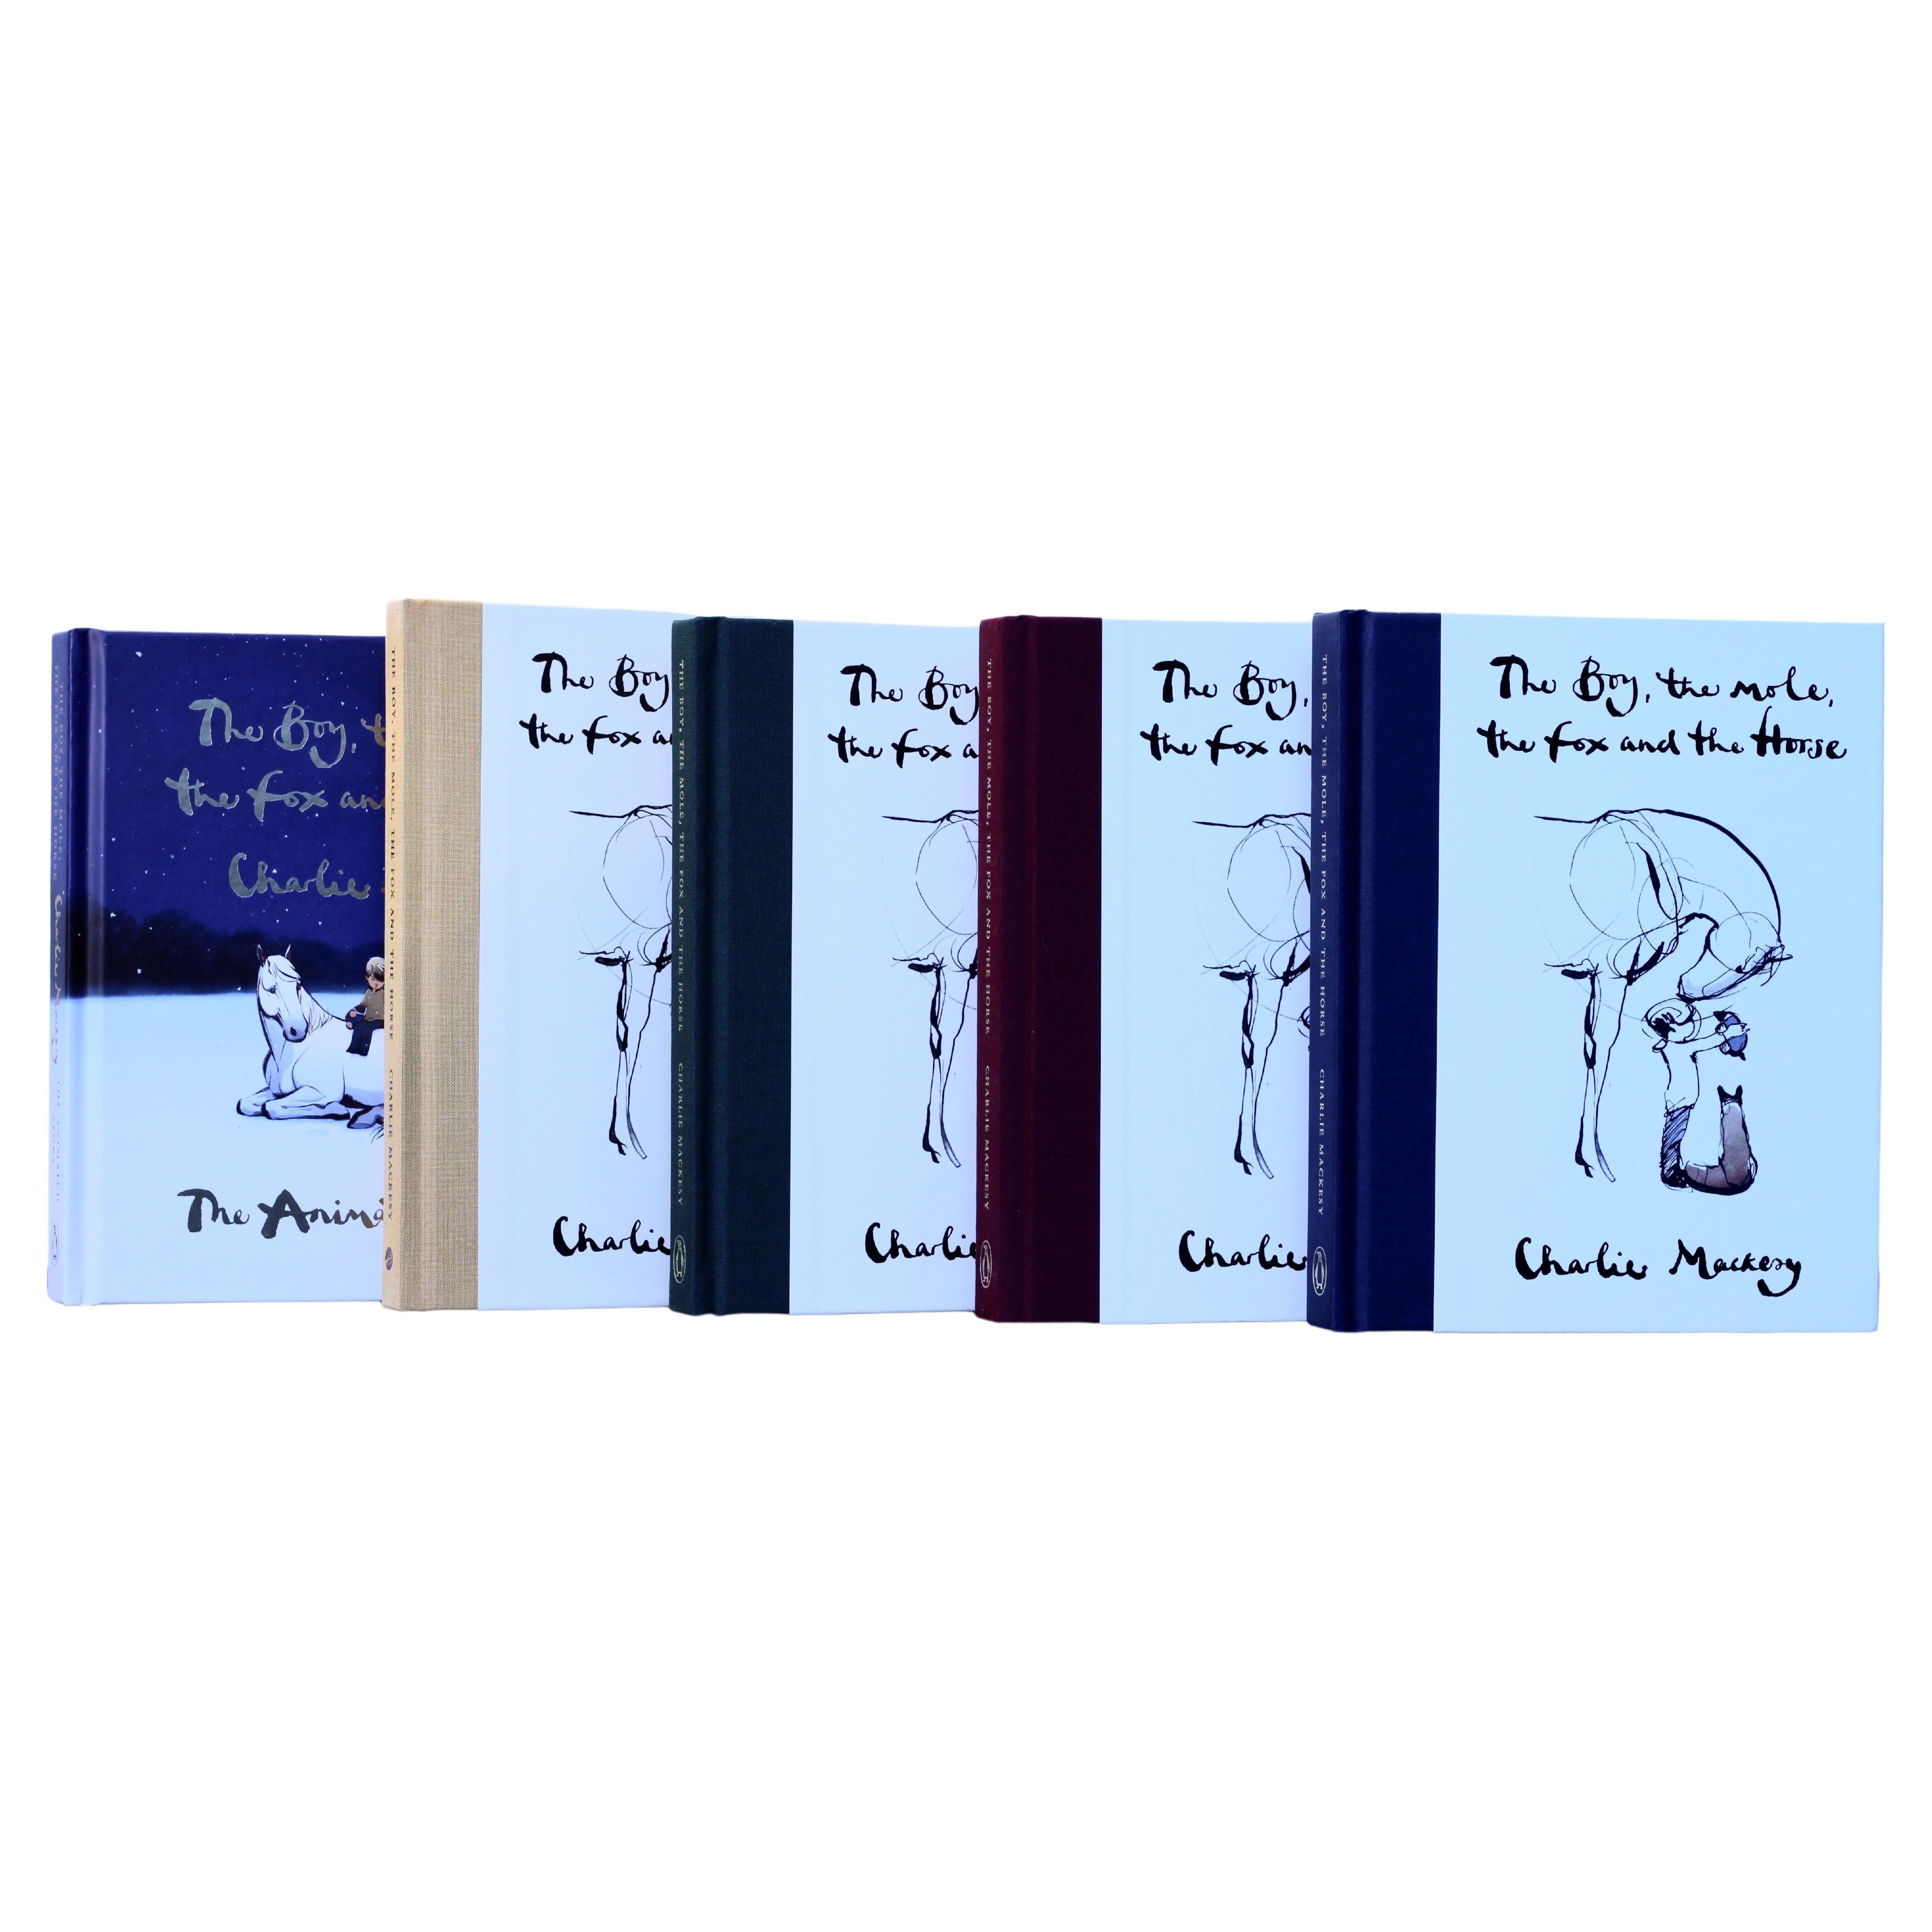 A very rare complete collection of signed true First edition / First Print of all five published editions of

The Boy, the Mole, the Fox and the Horse


All hand signed in person by the author, artist and illustrator Charlie Mackesy

Full documented